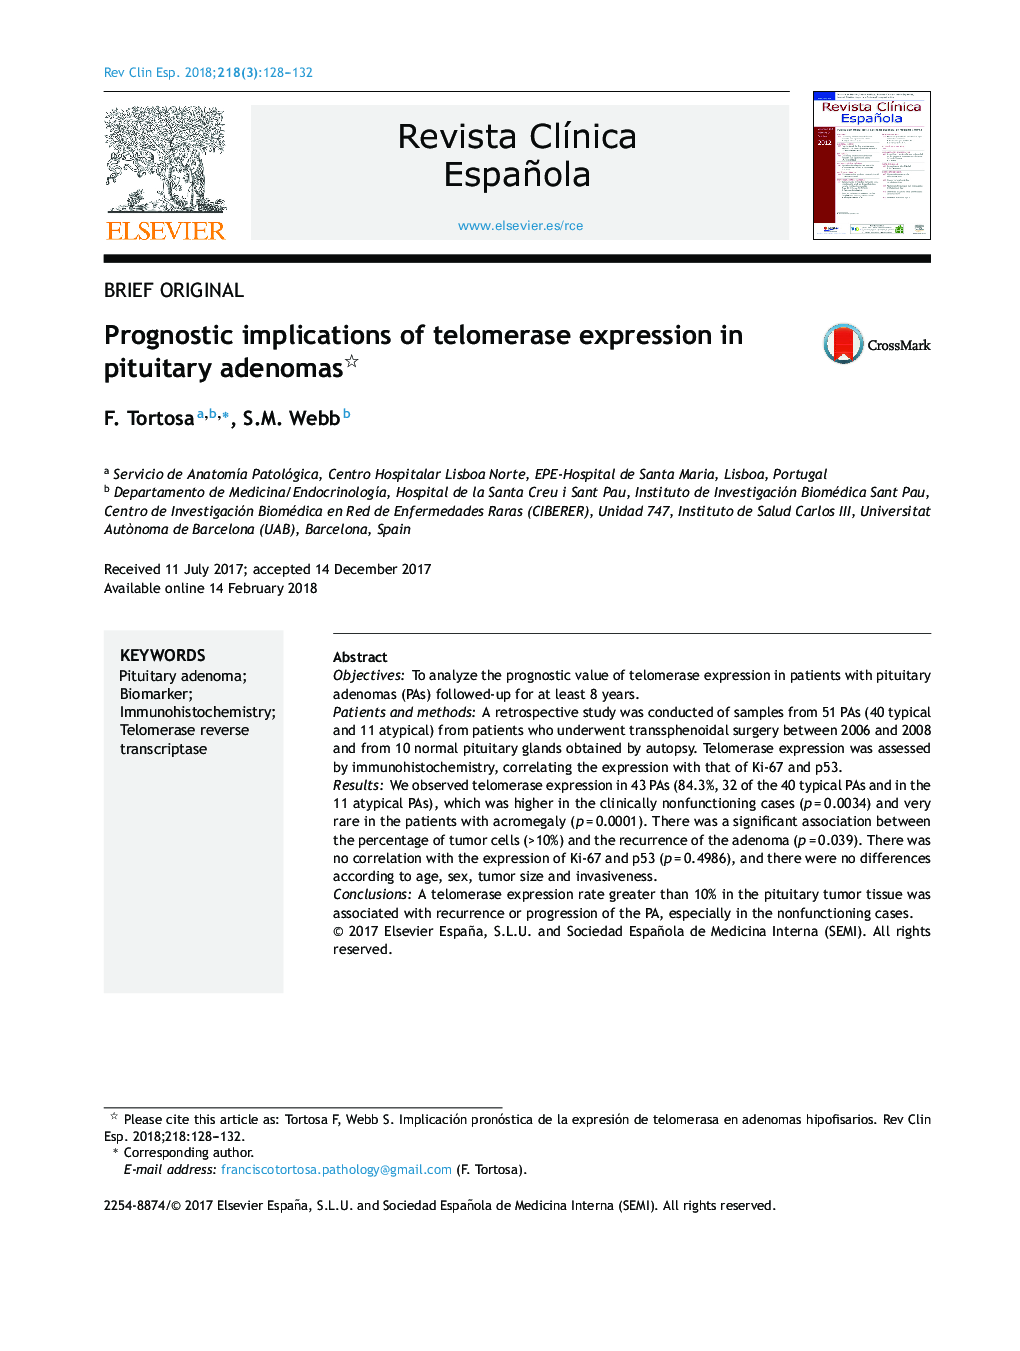 Prognostic implications of telomerase expression in pituitary adenomas